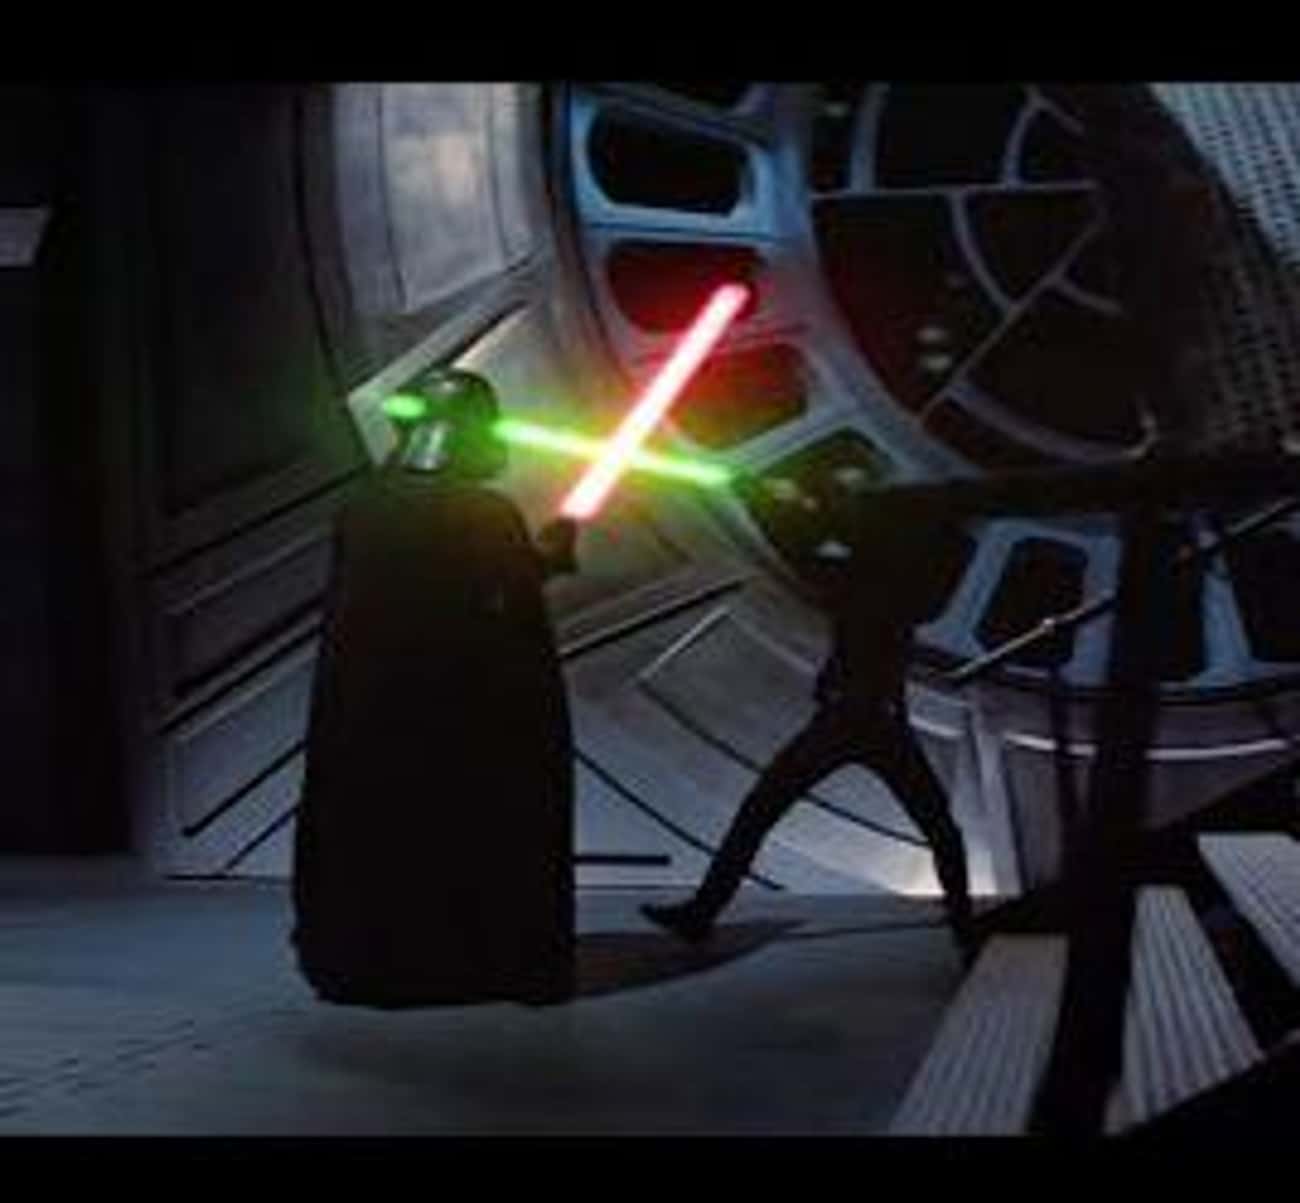 Darth Vader Taunted Luke To Trigger Feelings He Could Zero In On